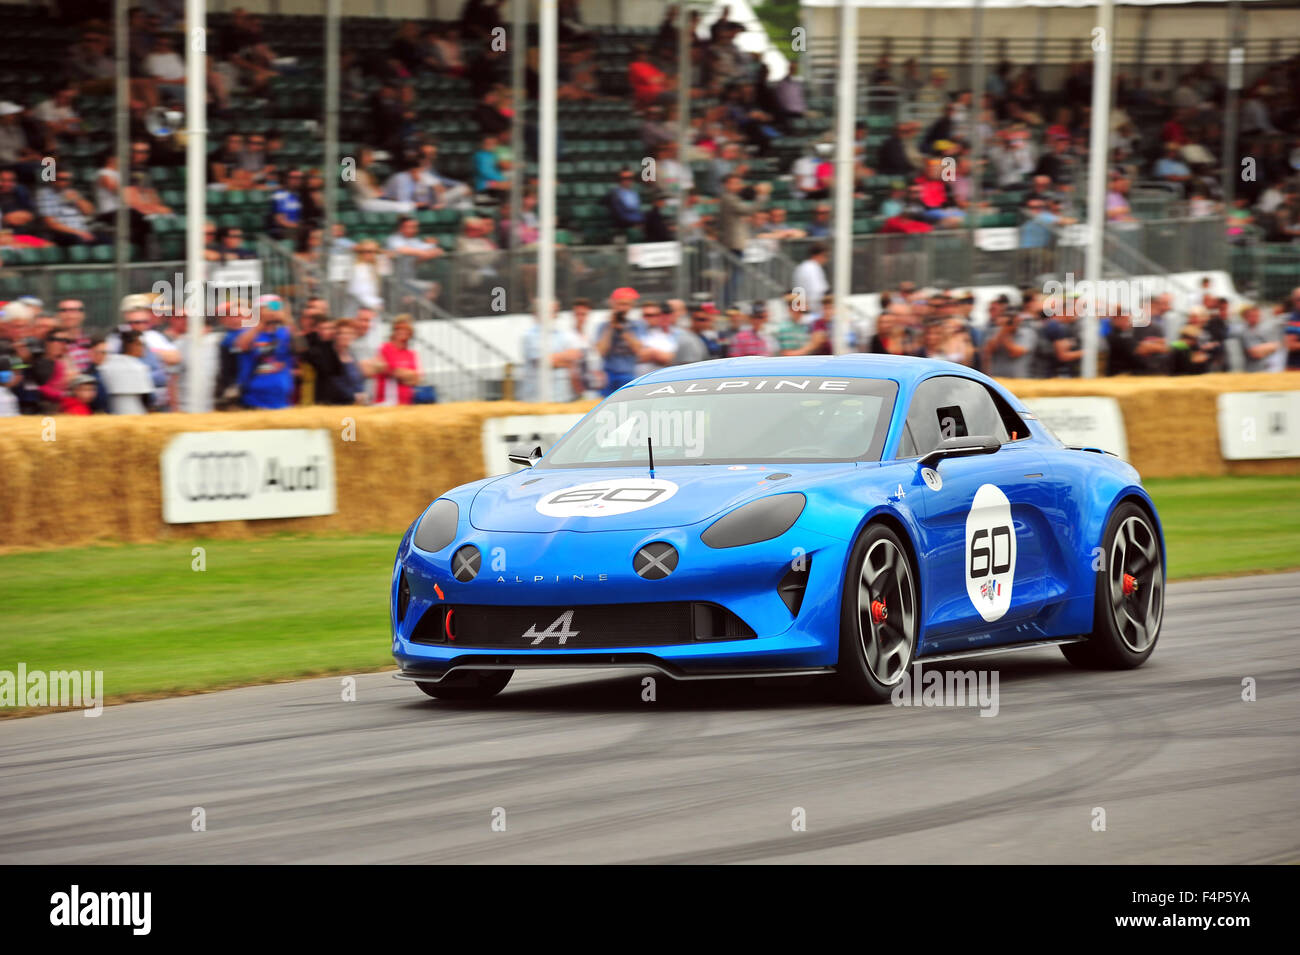 The Alpine Celebration concept at the Goodwood Festival of Speed in the UK. Stock Photo